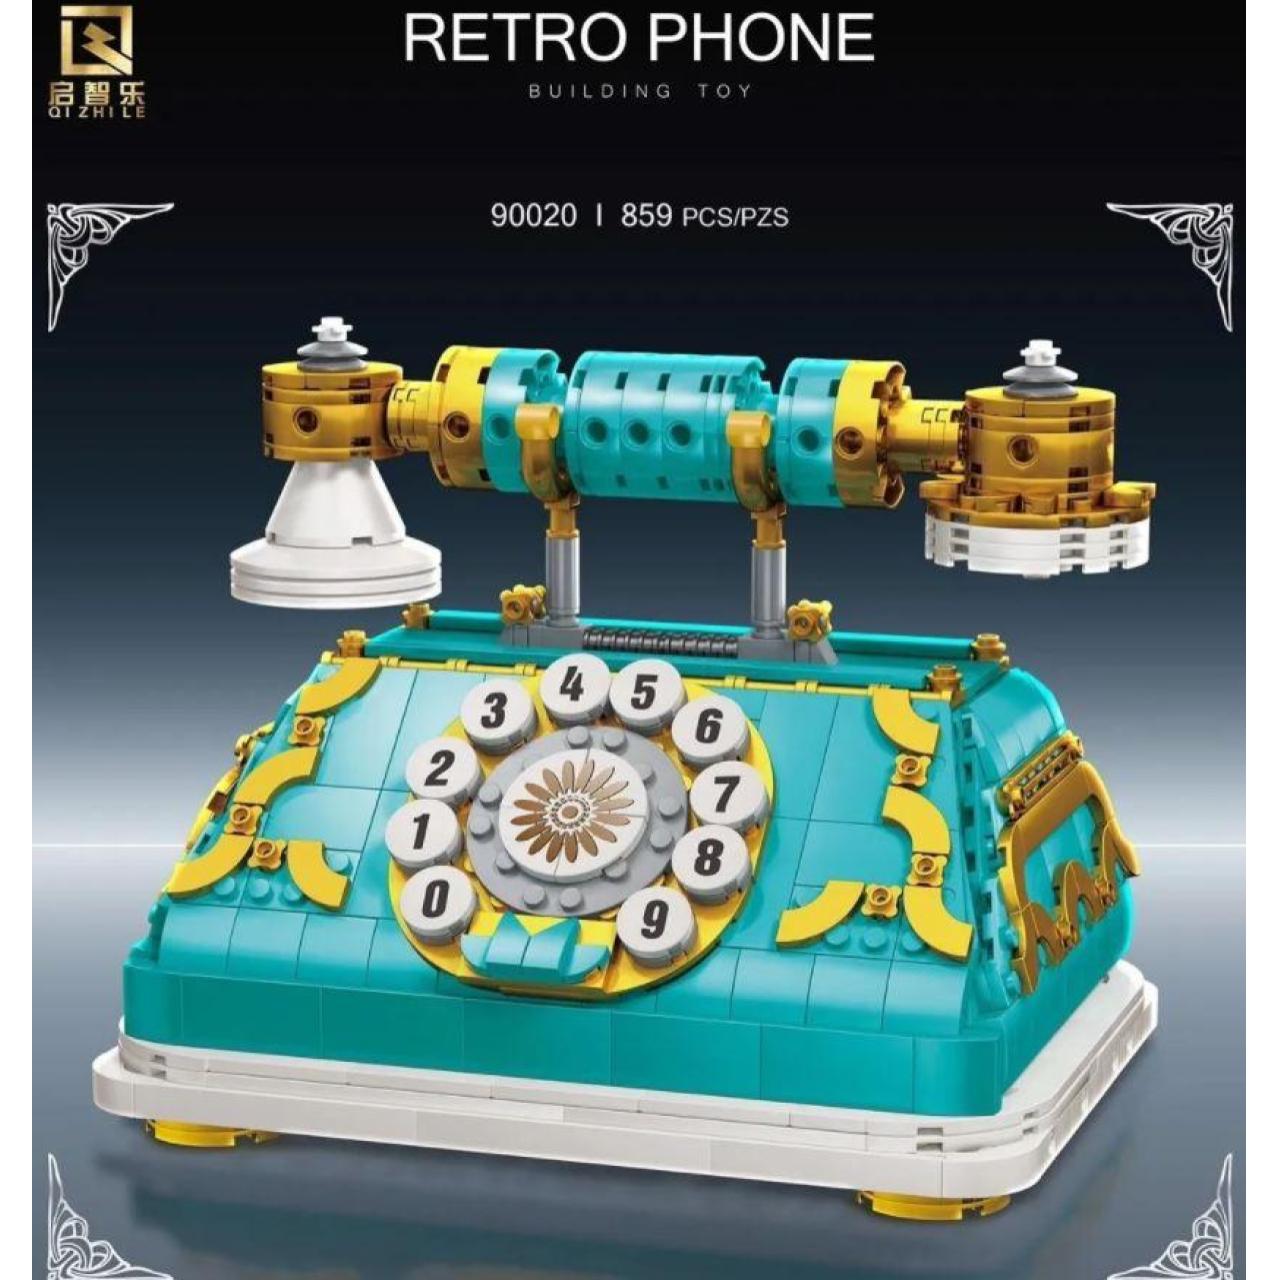 Retro Telephone CREATOR Qi Zhile 90020 with 859 pieces